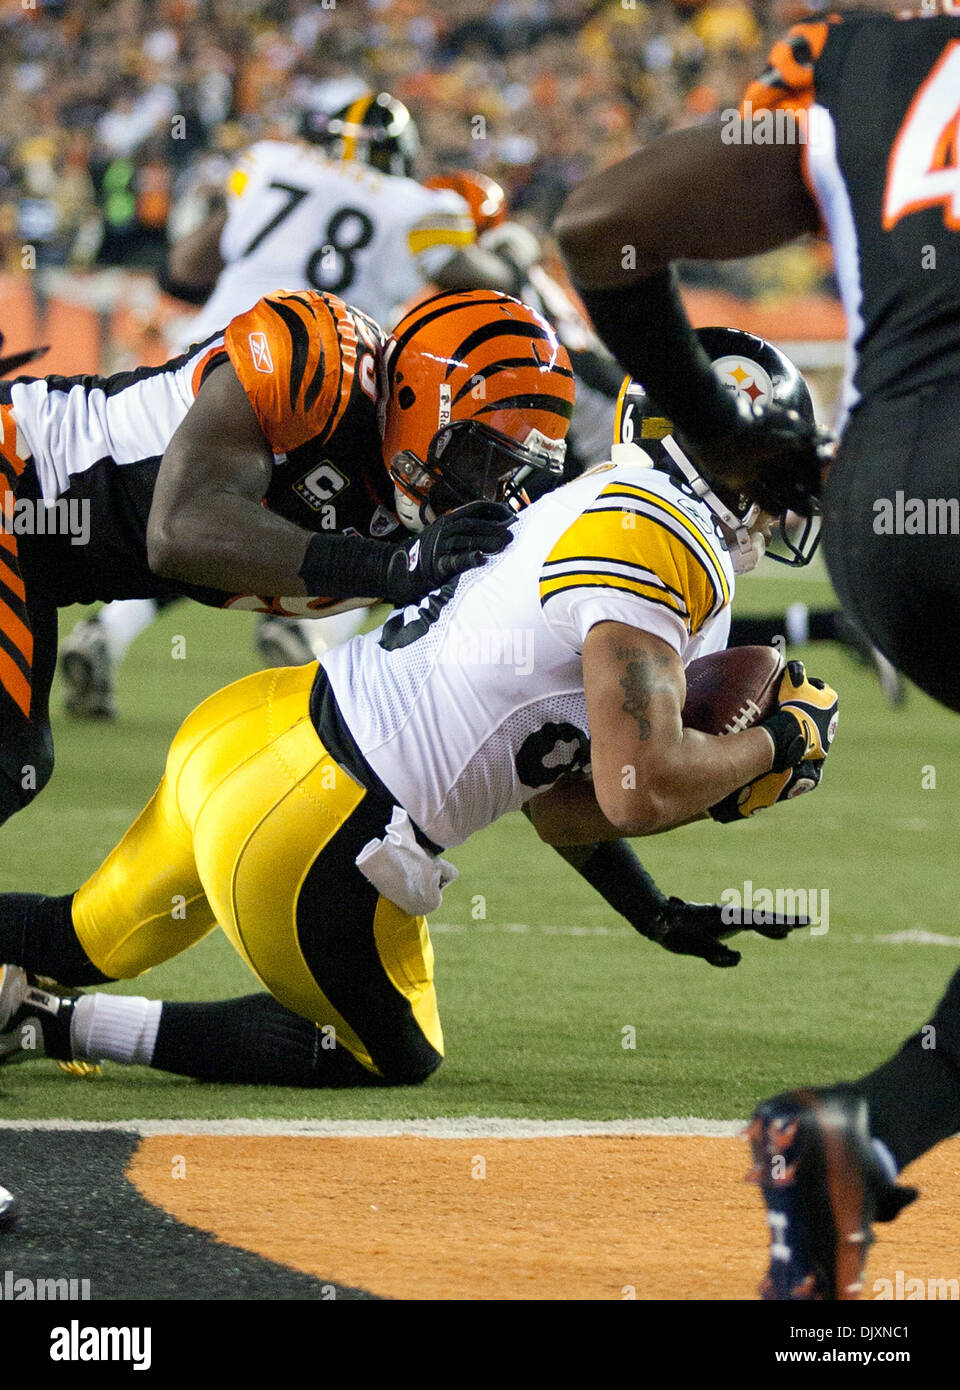 Nov. 8, 2010 - Cincinnati, Ohio, United States of America - Pittsburgh wide receiver Hines Ward (86) makes a diving catch for a touchdown vs the bengals in action from Paul Brown Stadium.The steelers went on to win 27 to 21. (Credit Image: © Wayne Litmer/Southcreek Global/ZUMApress.com) Stock Photo